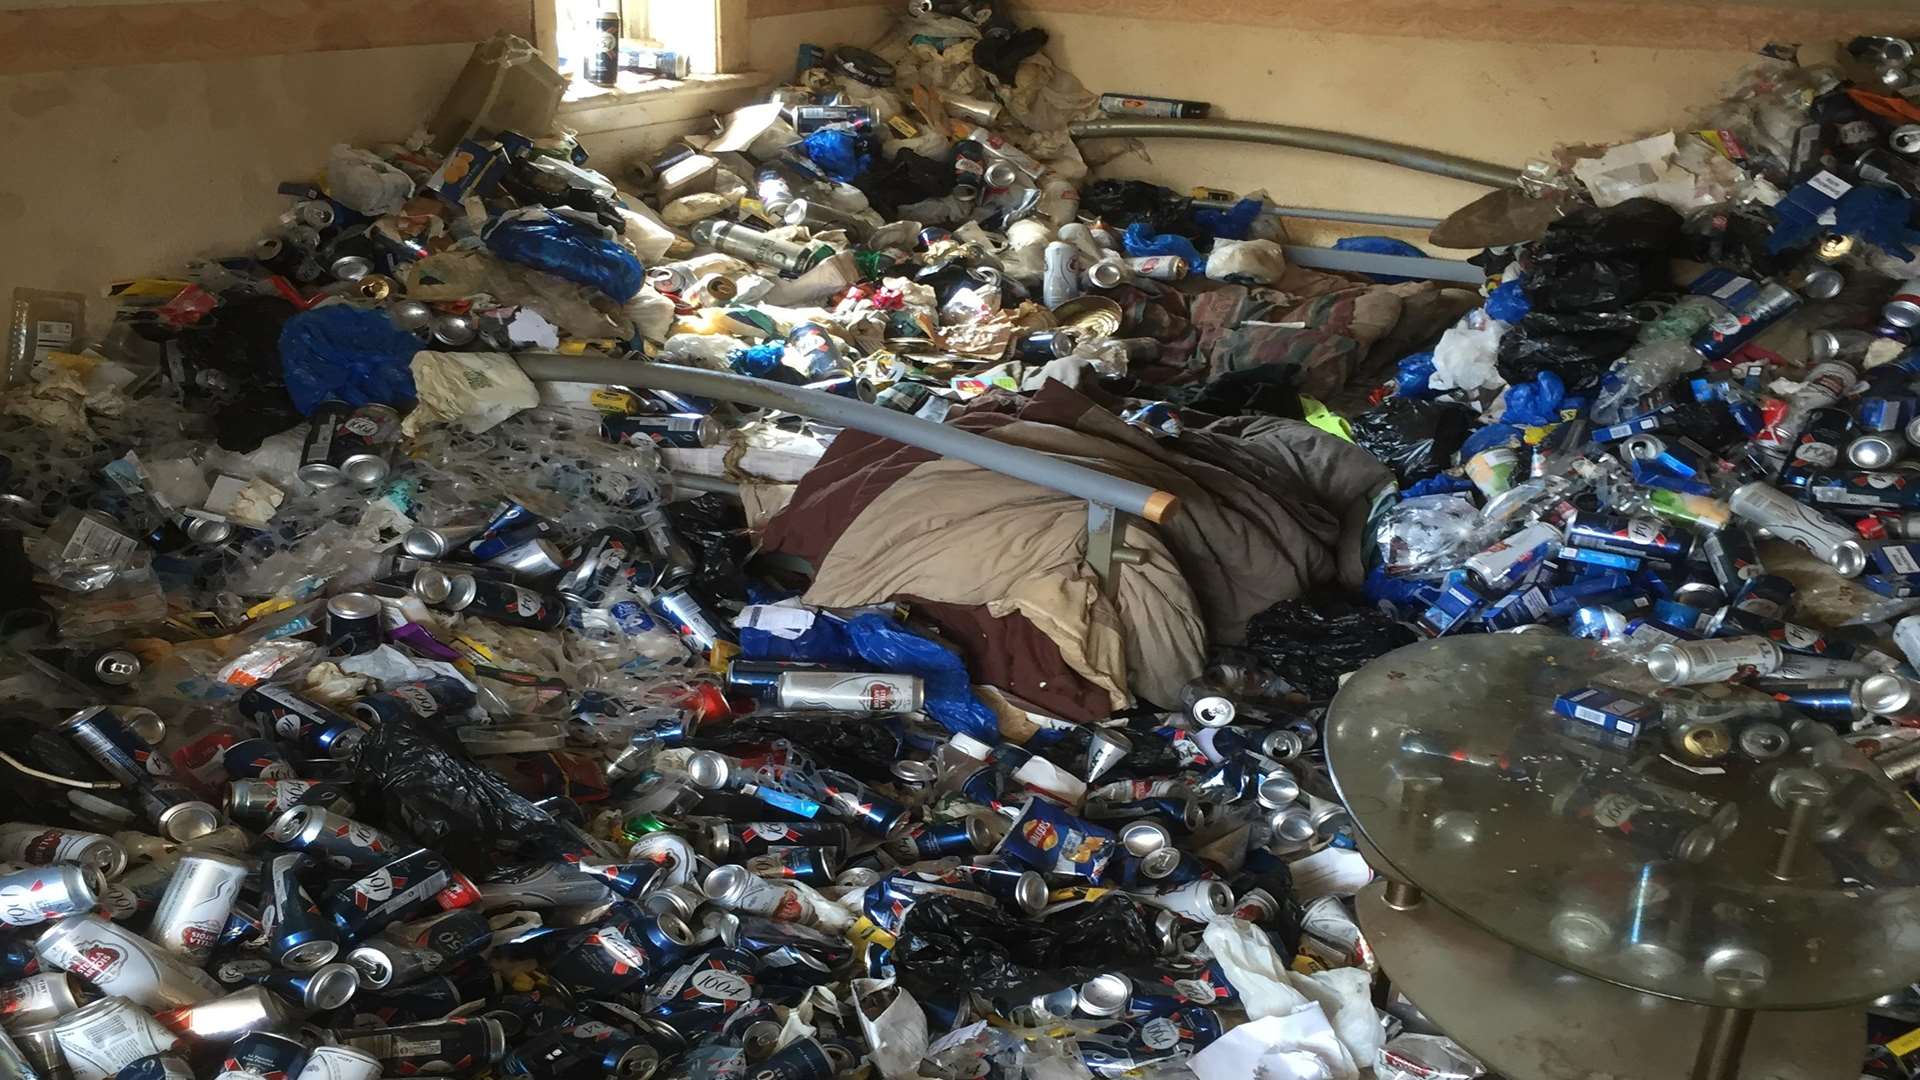 The shocking mess left at Graham Holland's property in Park Road, Sittingbourne